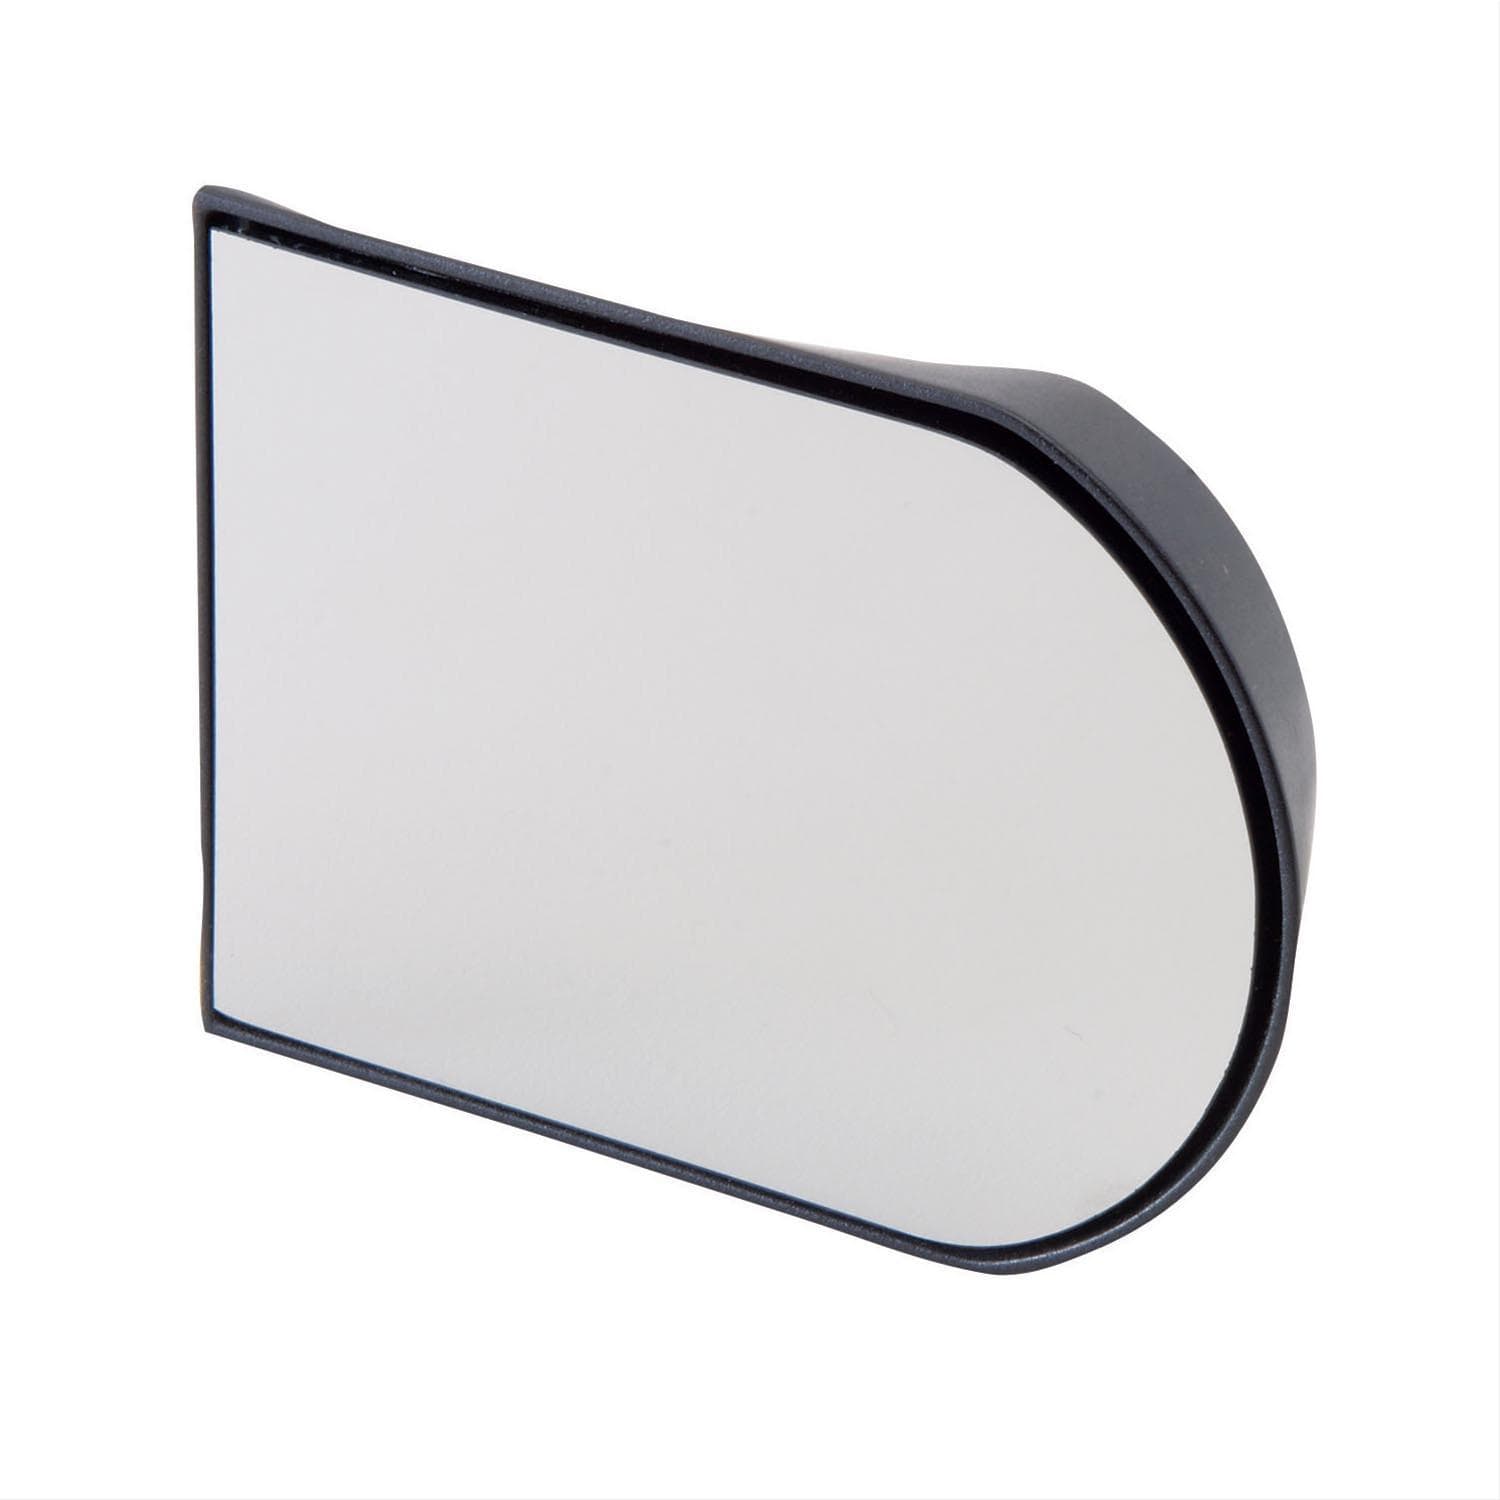 K Source CW052 Fit System 3" X 4" Super View Blind Spot Mirror